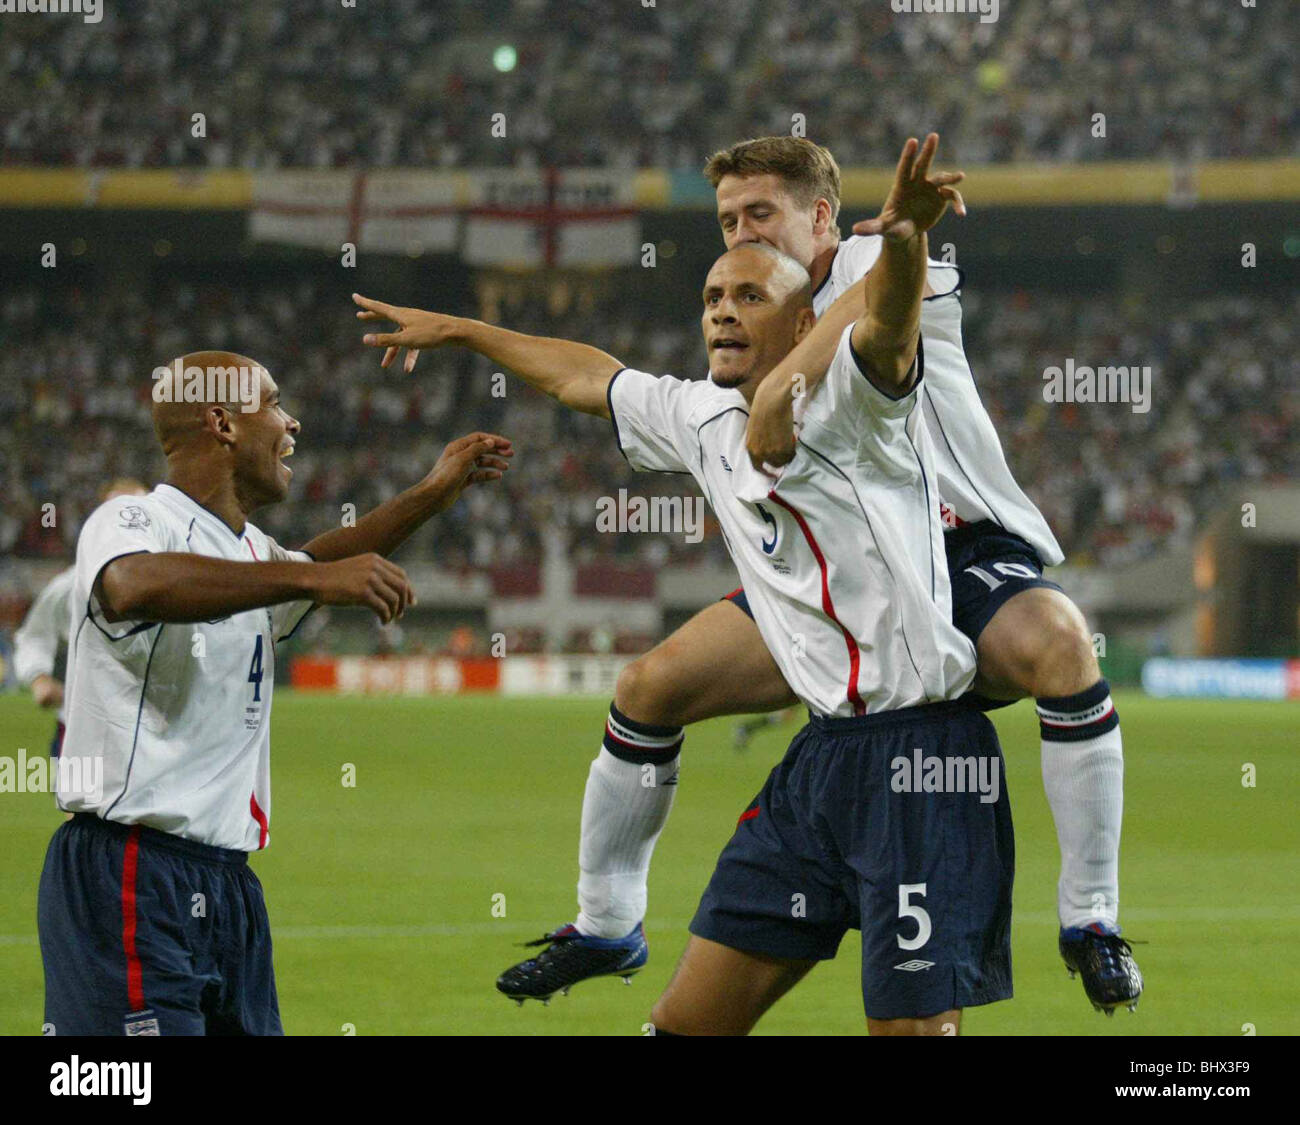 England 3 Denmark 0 June 2002, Owen and Sinclair celebrate with Ferdinand after he scores the 1st goal. Stock Photo